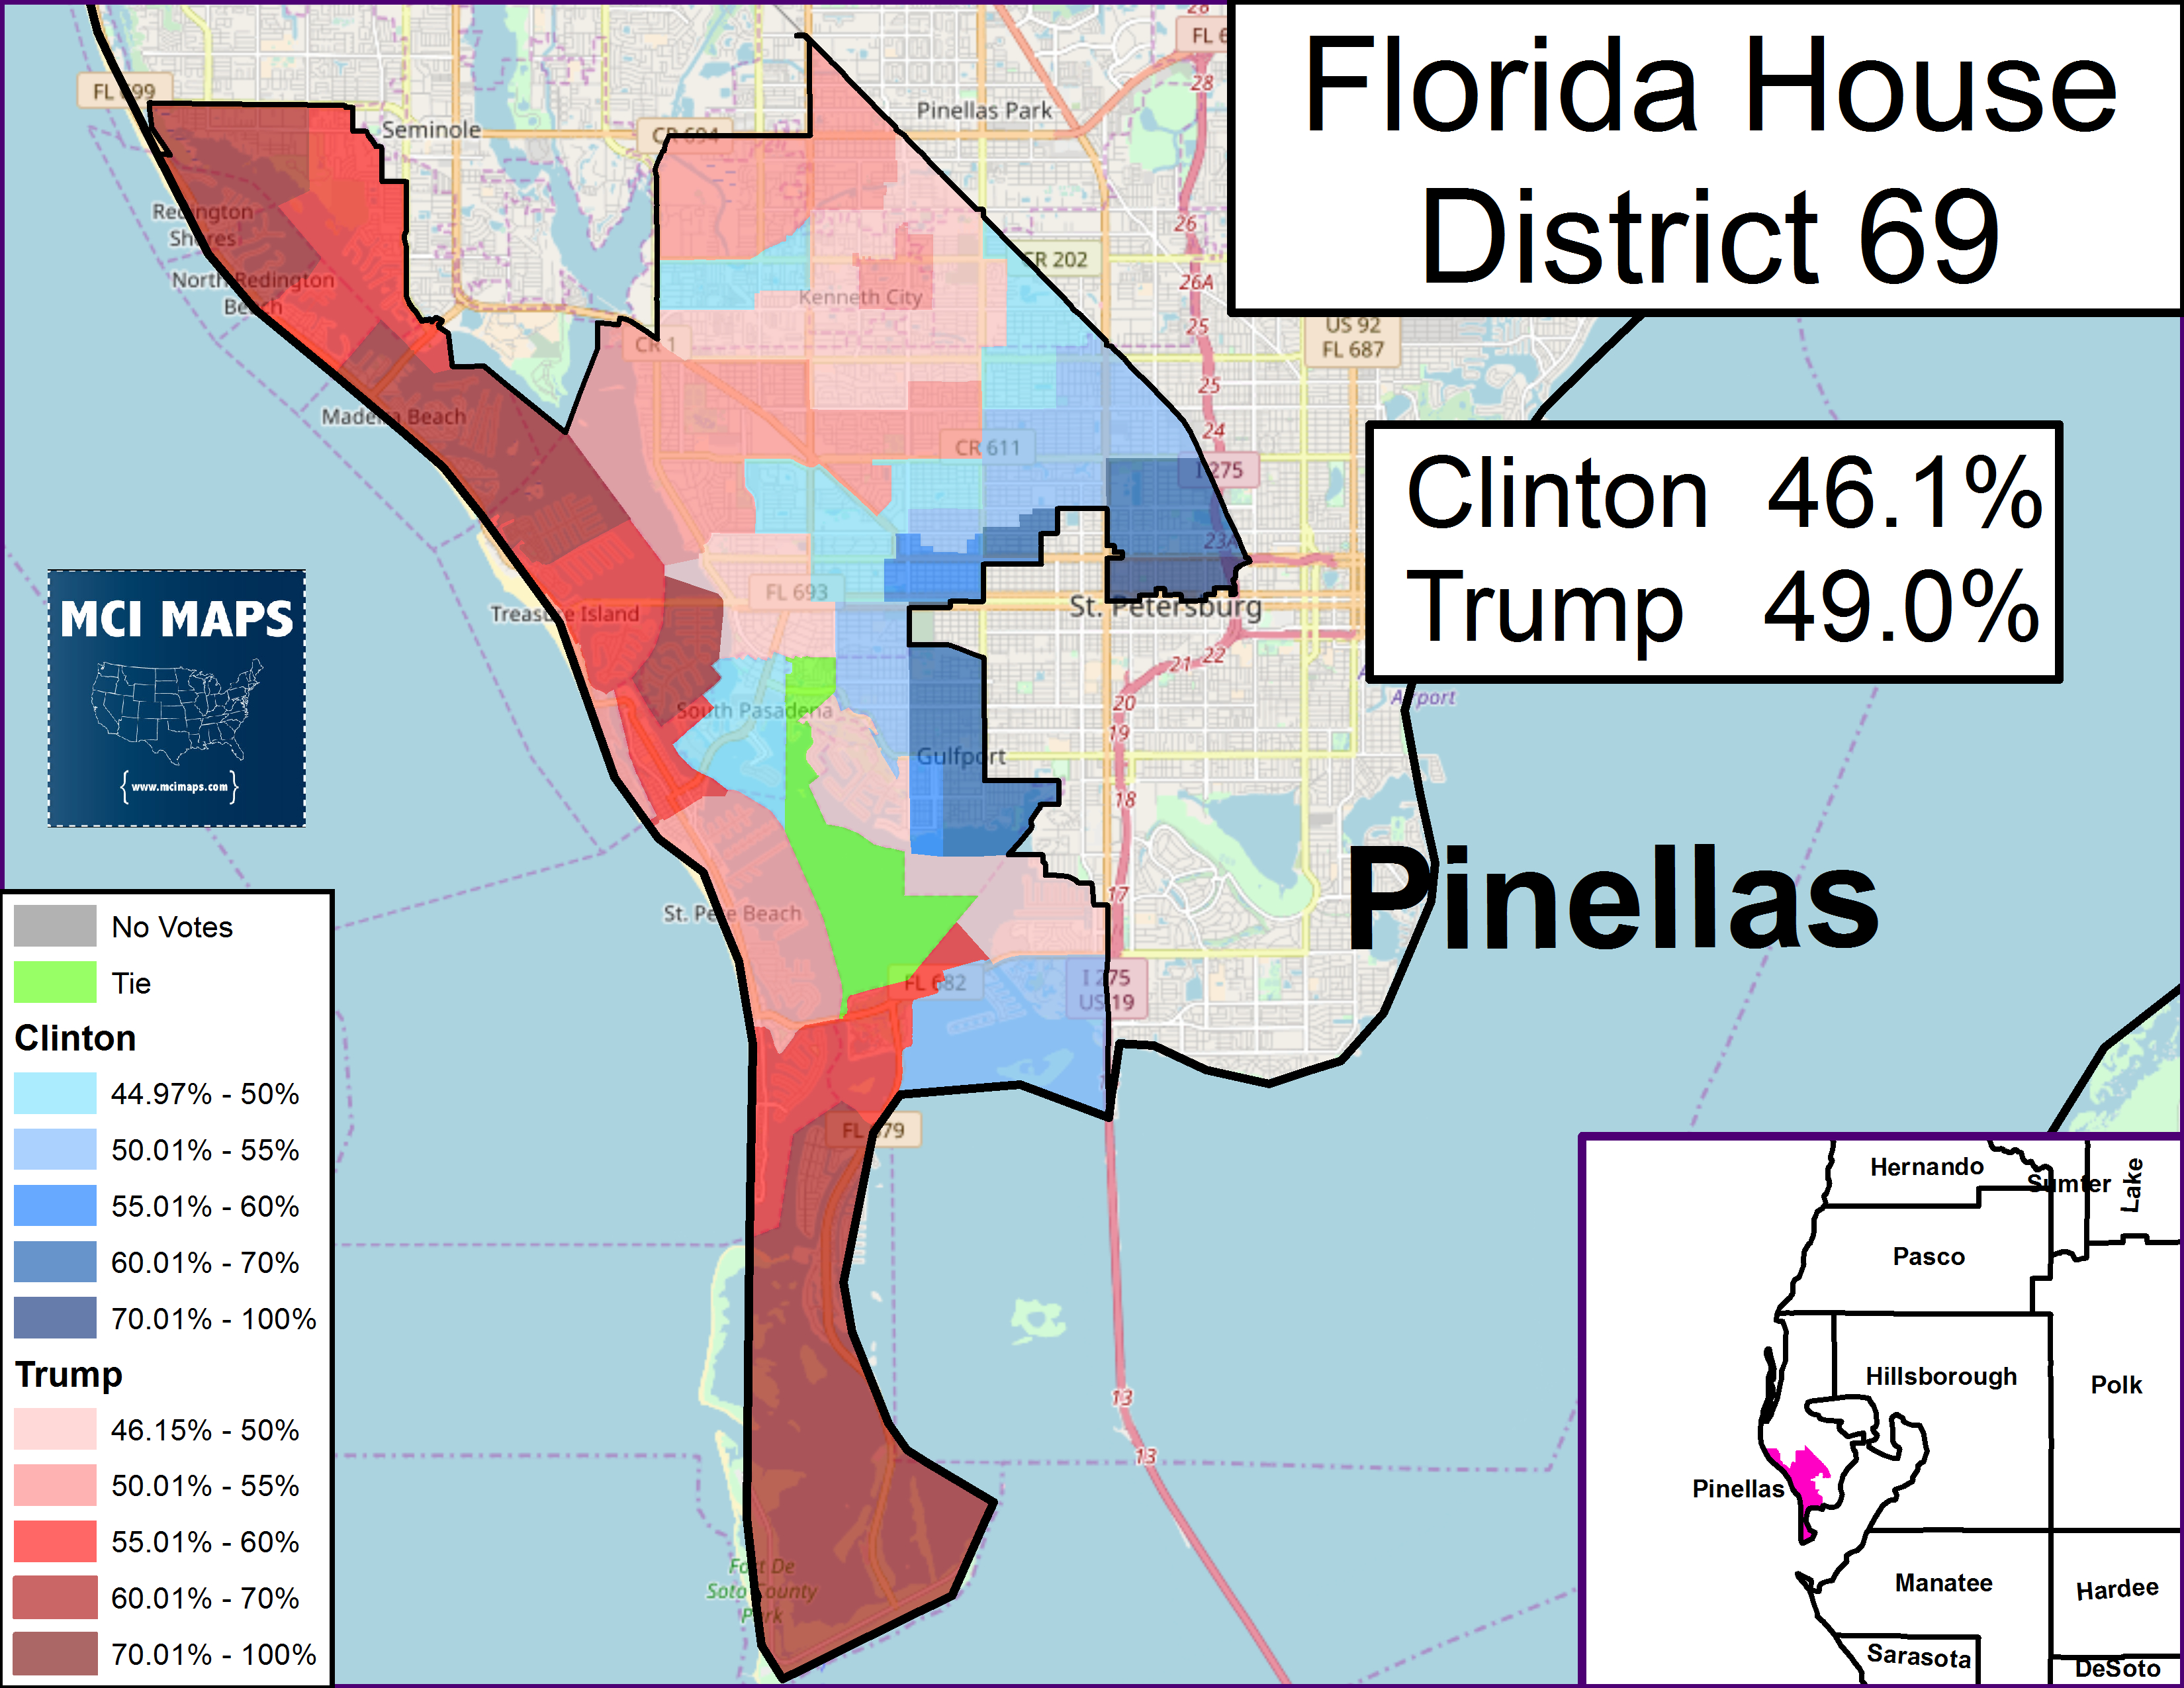 Florida&amp;#039;s 2018 State House Ratings – Mci Maps - Florida House District 64 Map